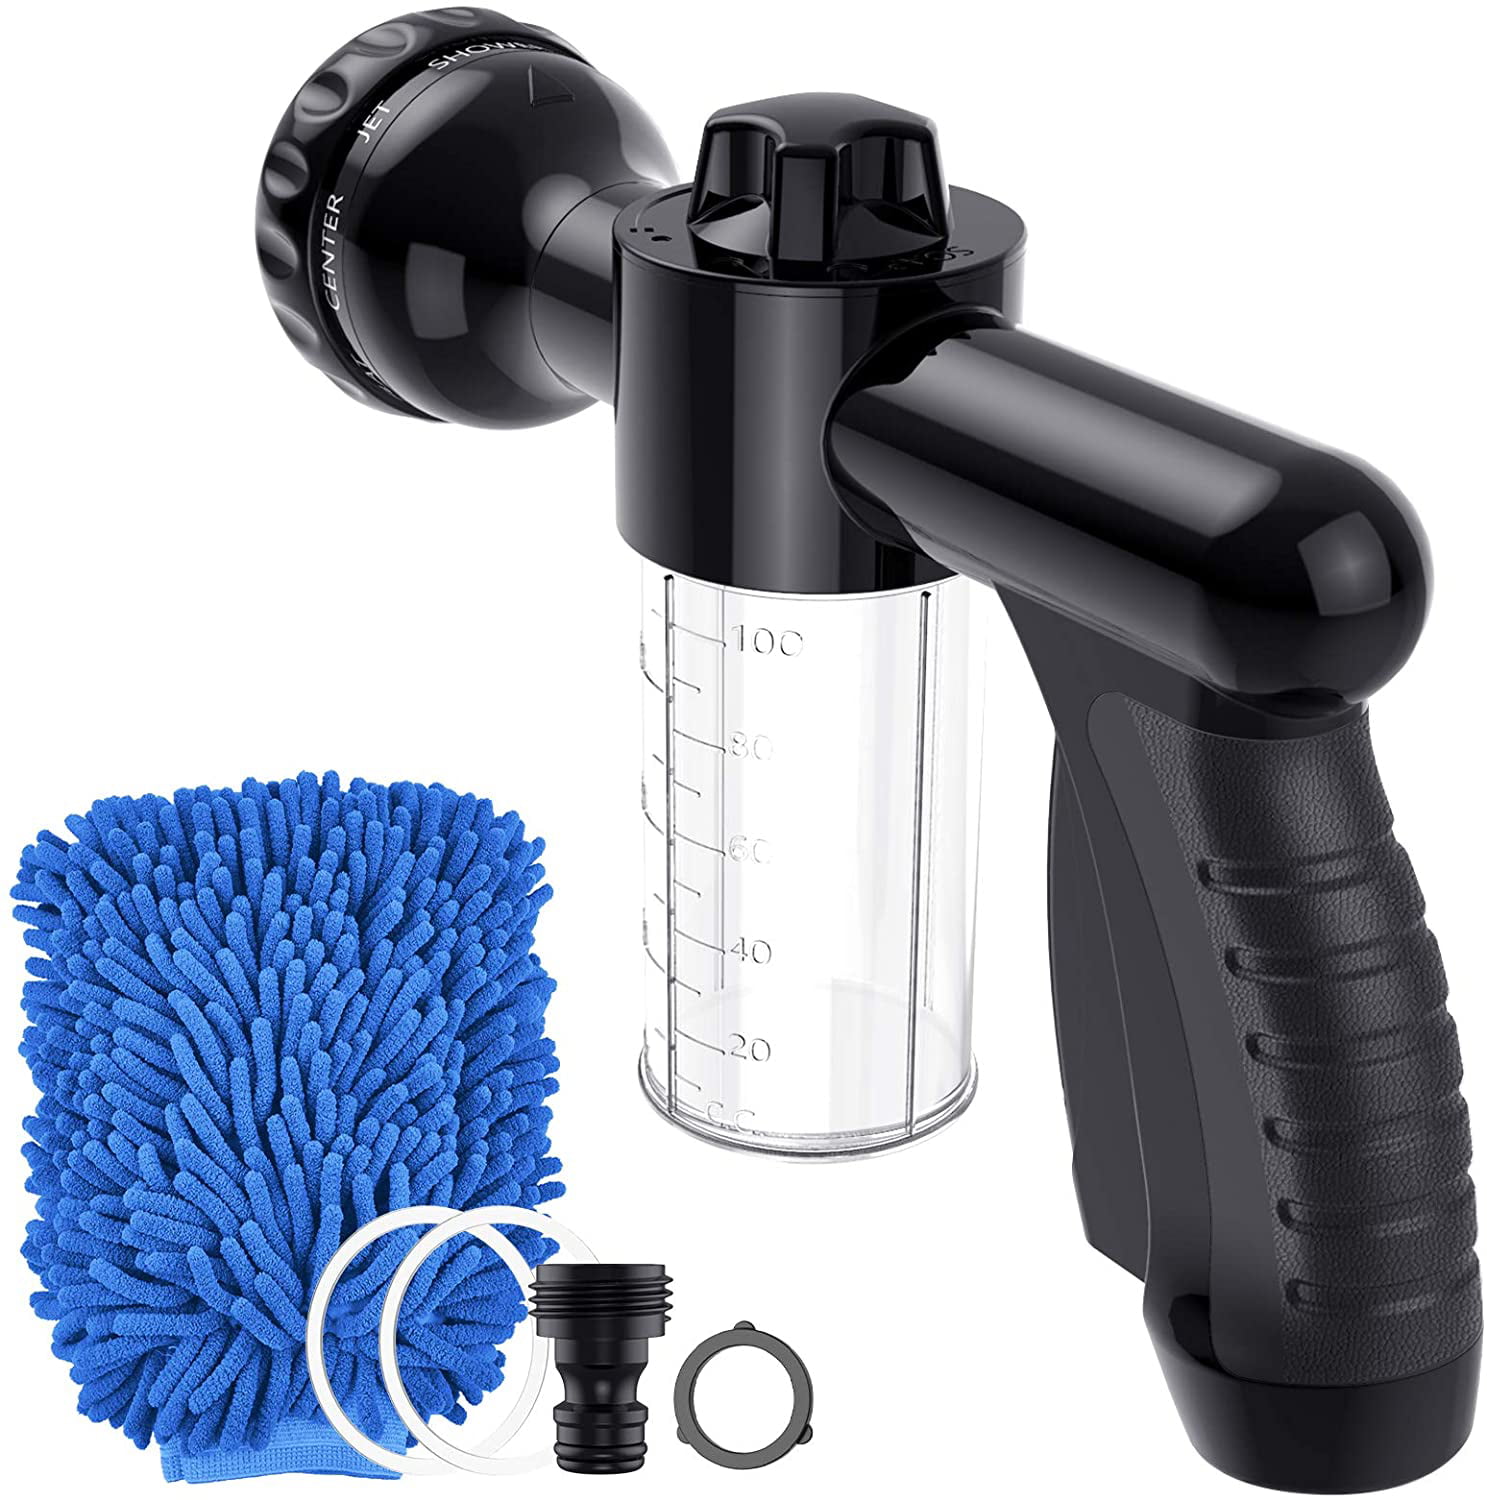 Foam Cannon for Car Home Cleaning and Garden Use with 1L Bottle SUNYPLAY Car Wash Foam Gun,Adjustable Hose Wash Sprayer & Soap Ratio Dial